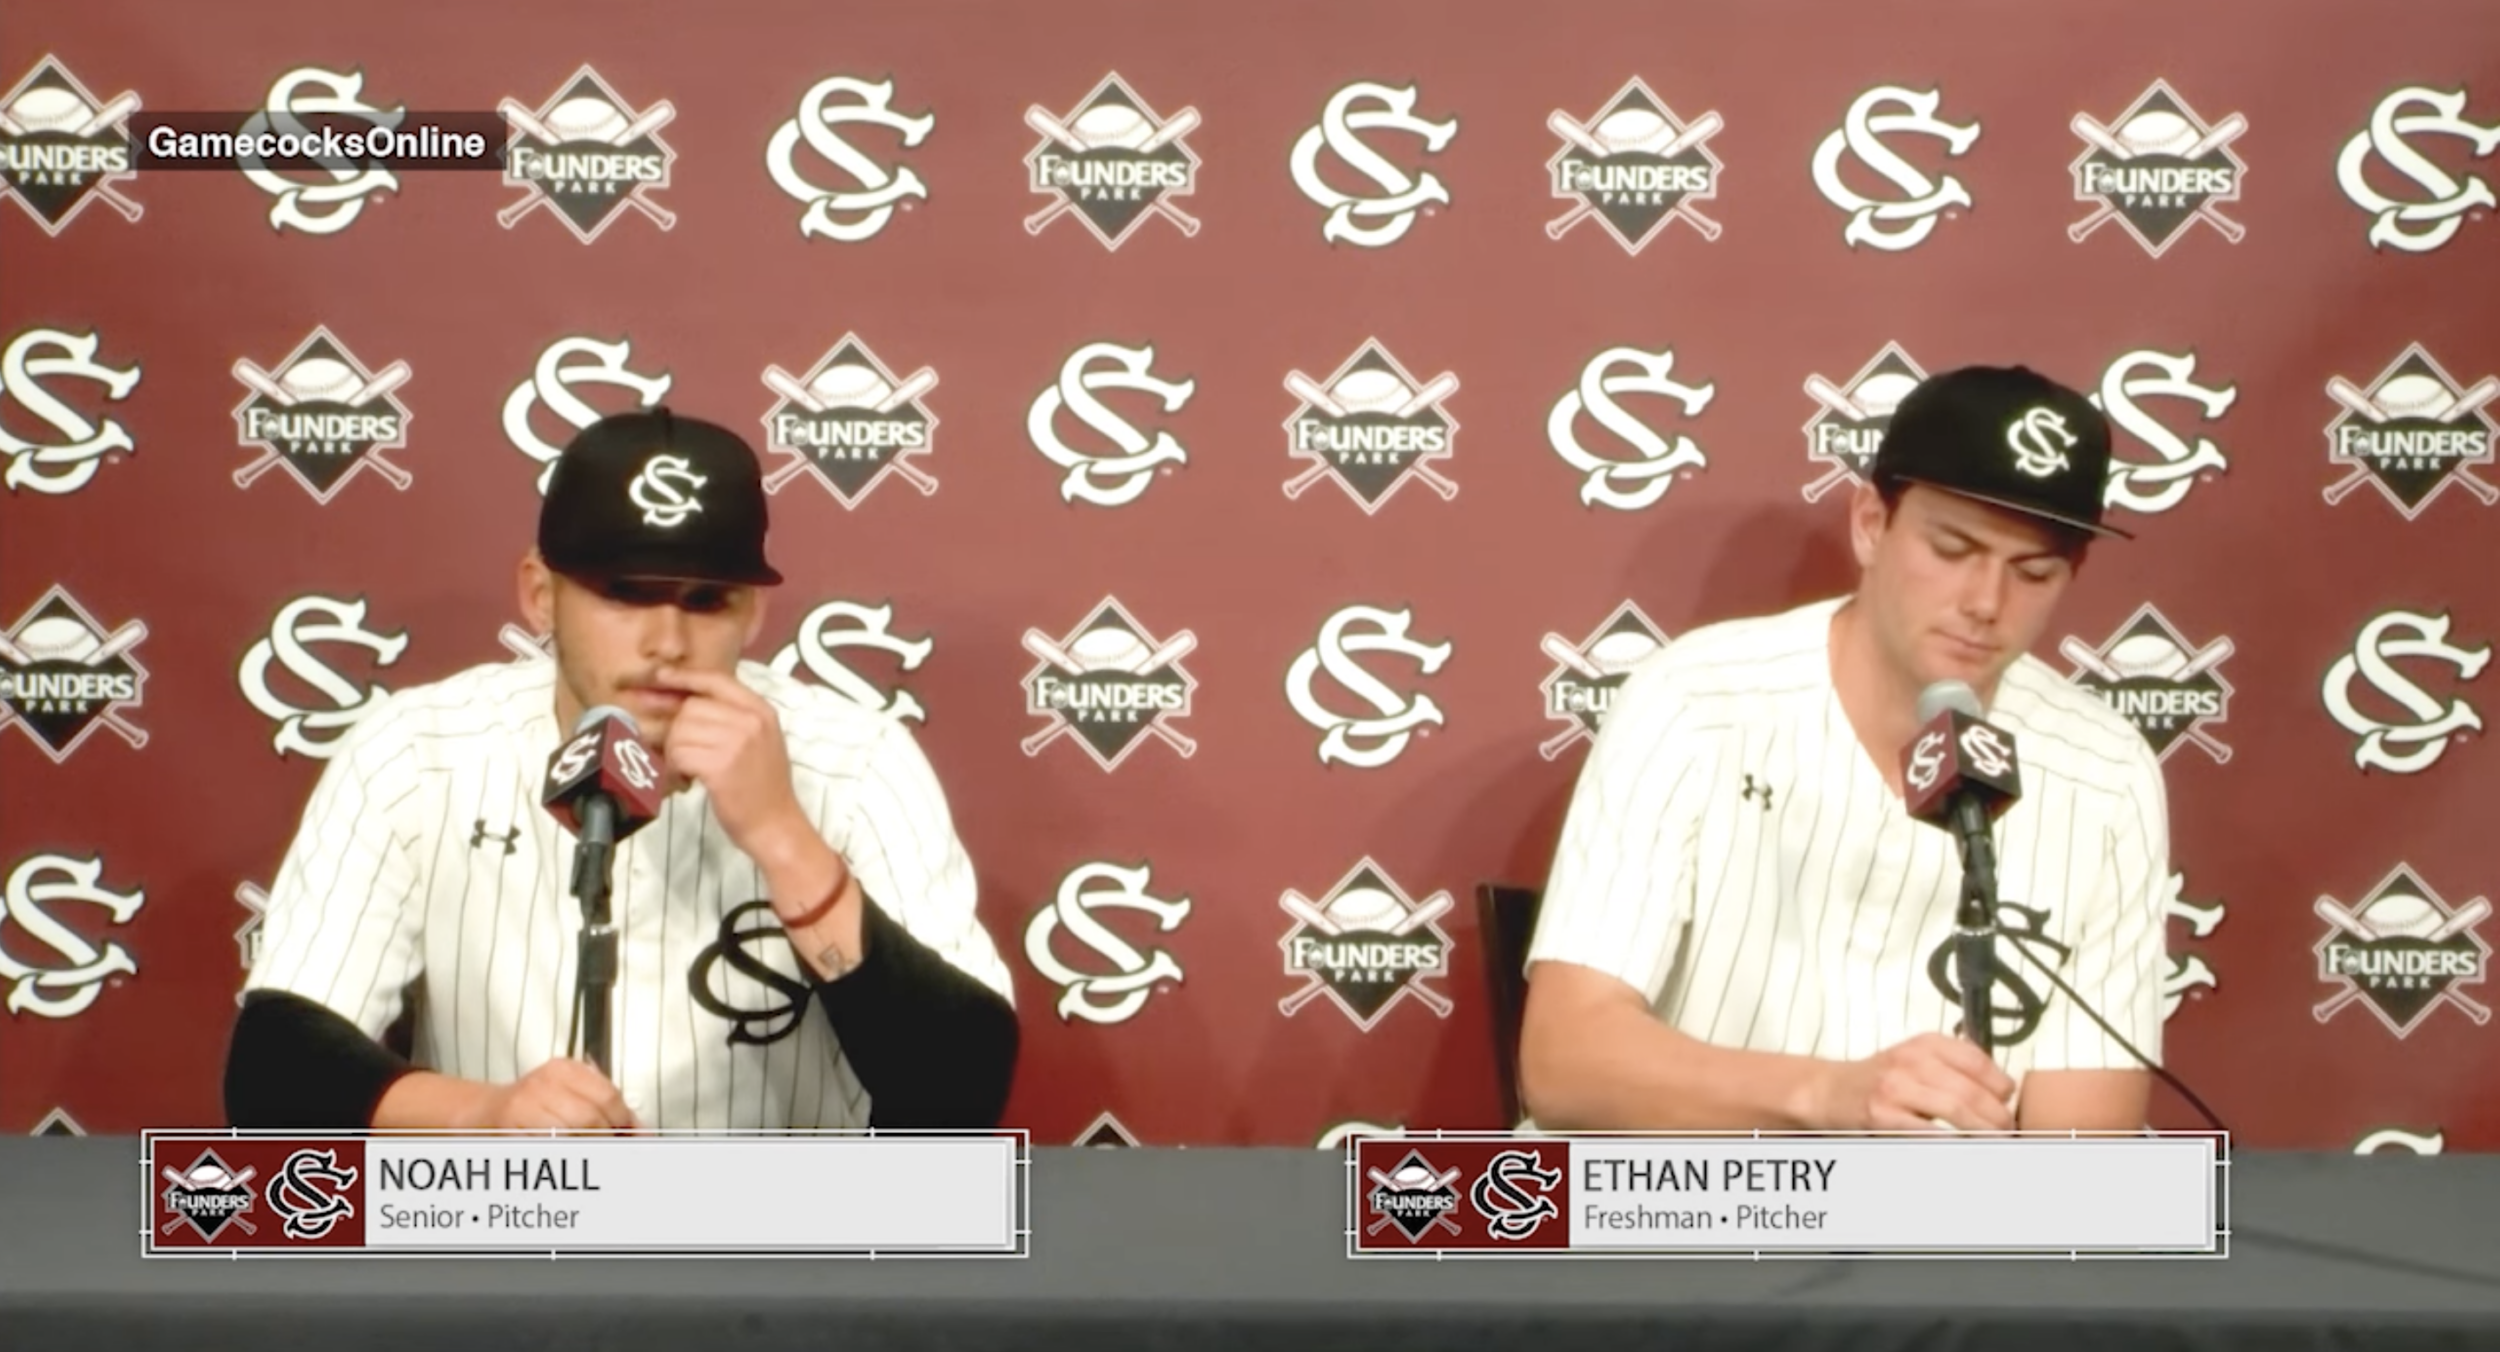 PostGame: (Penn) - Noah Hall and Ethan Petry News Conference